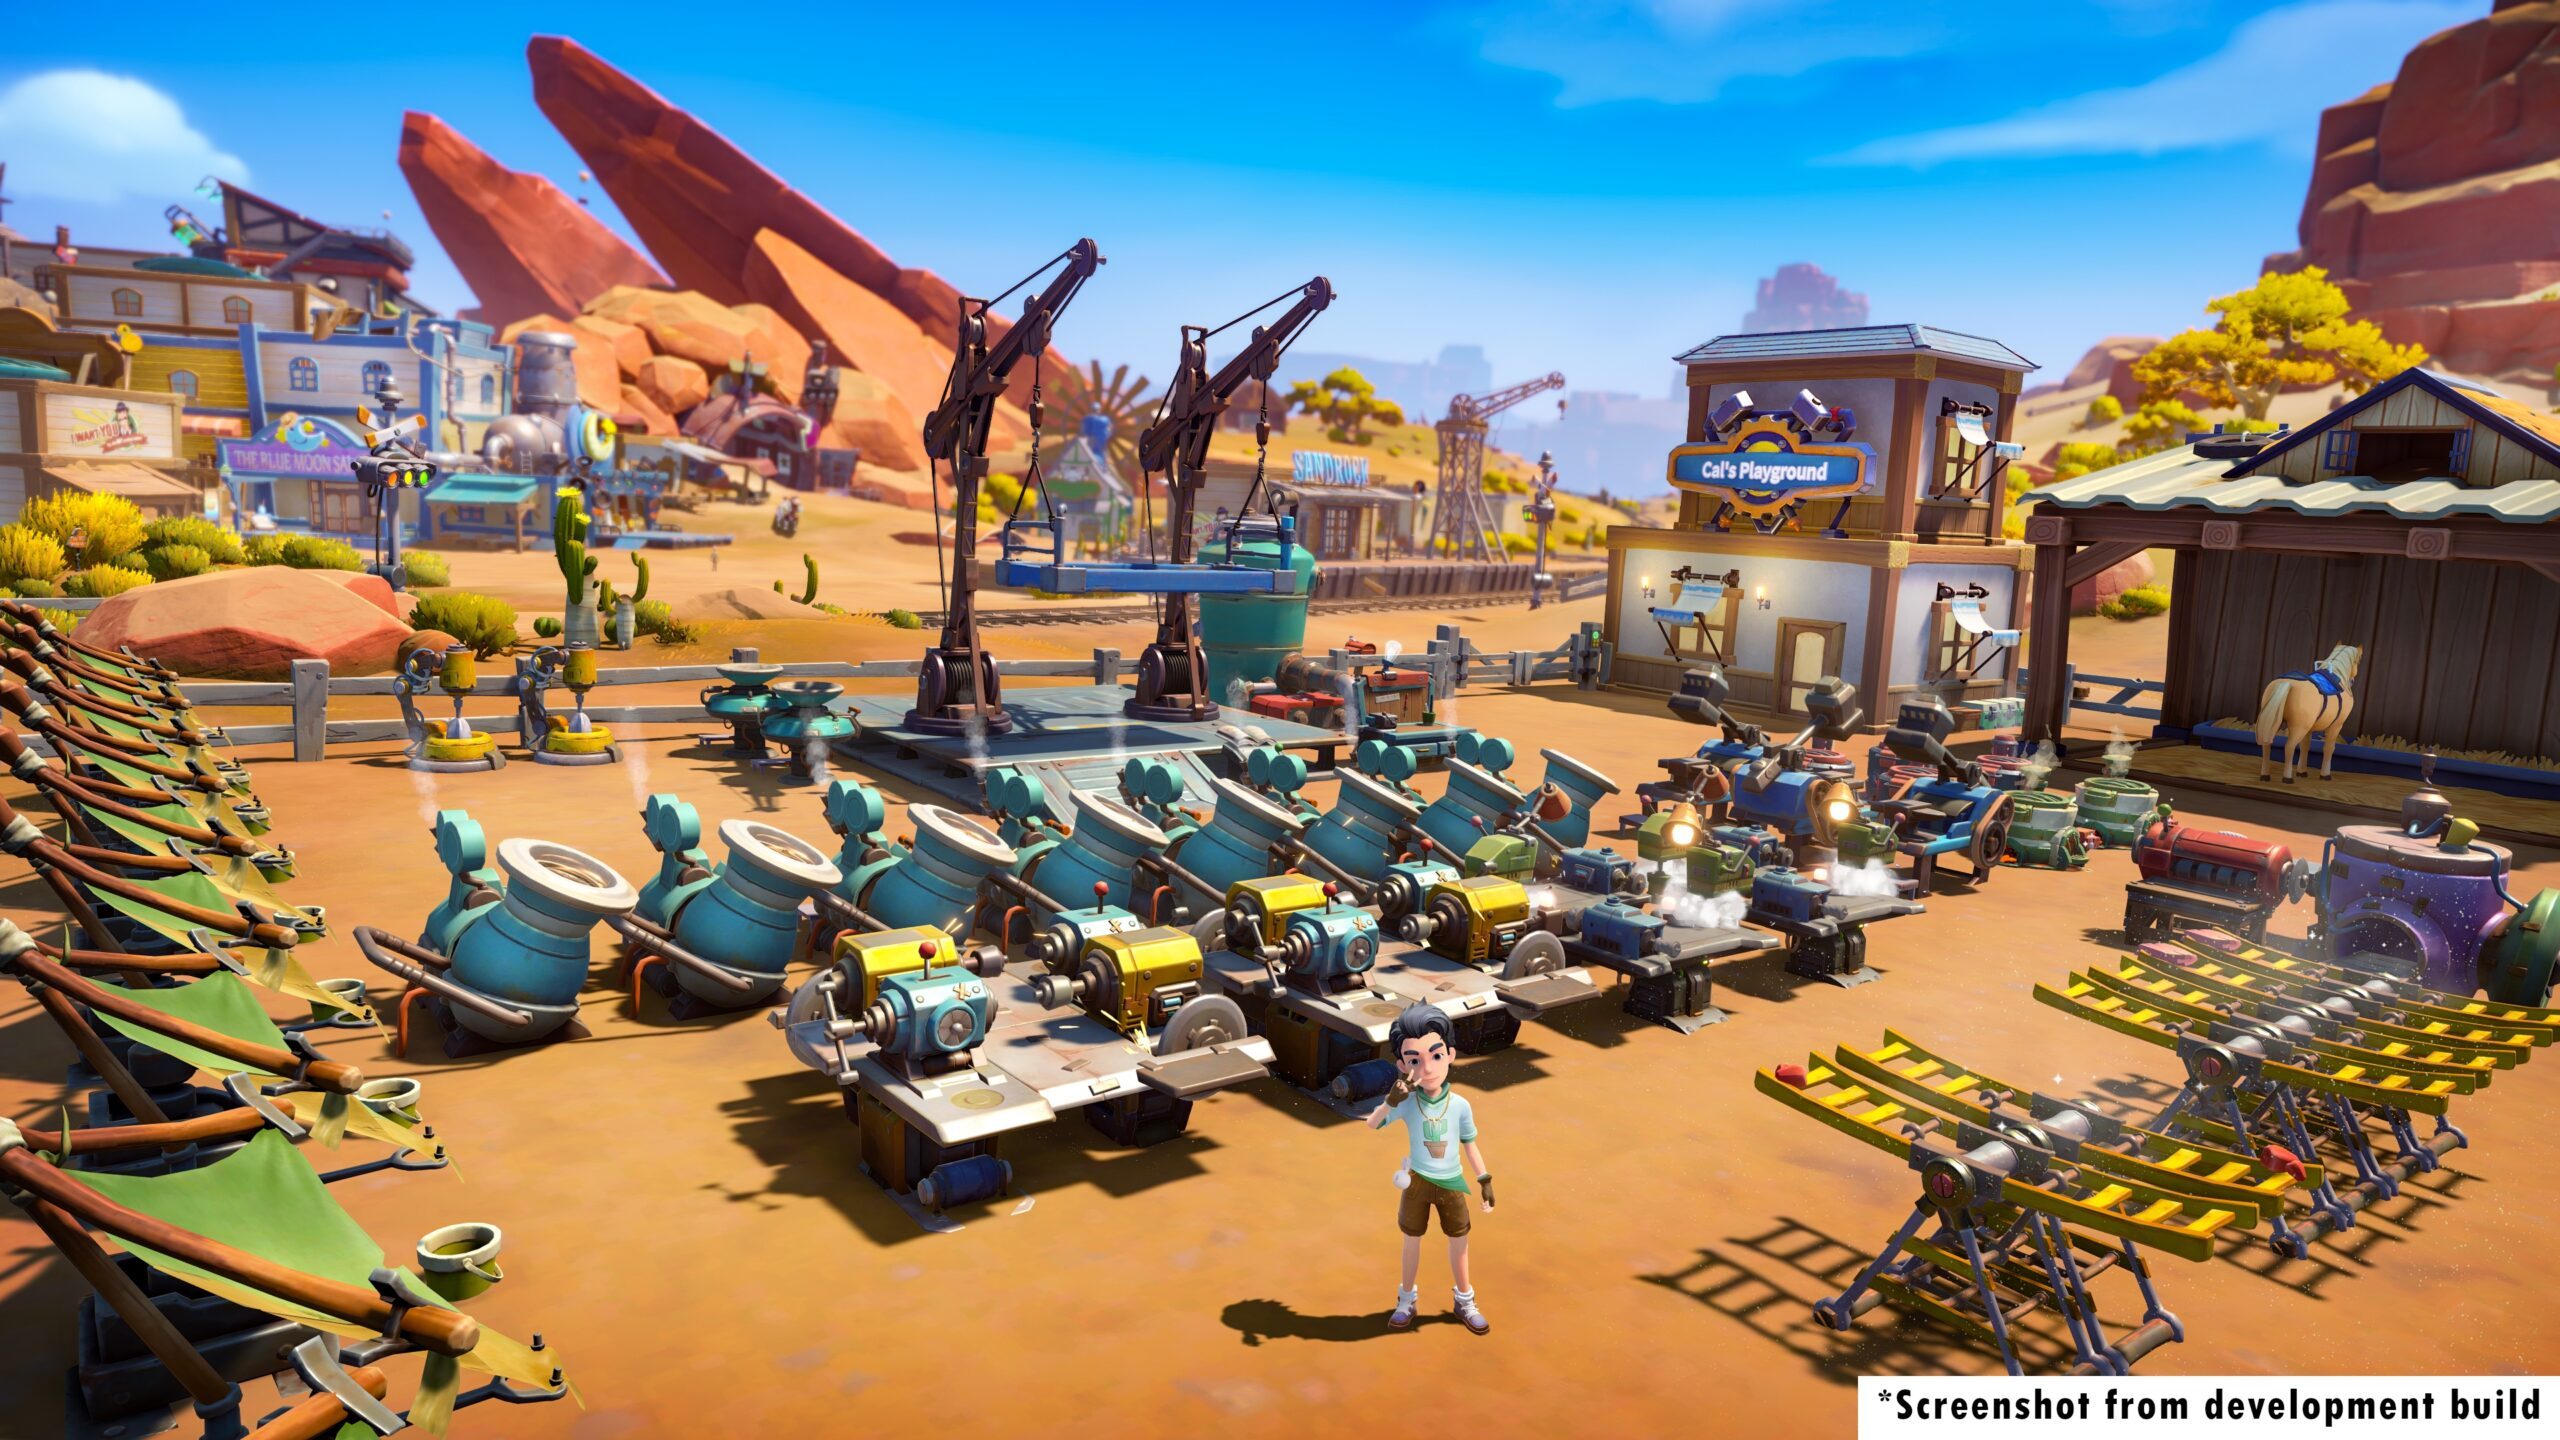 Town sim meets action adventure in My Time at Sandrock, out this